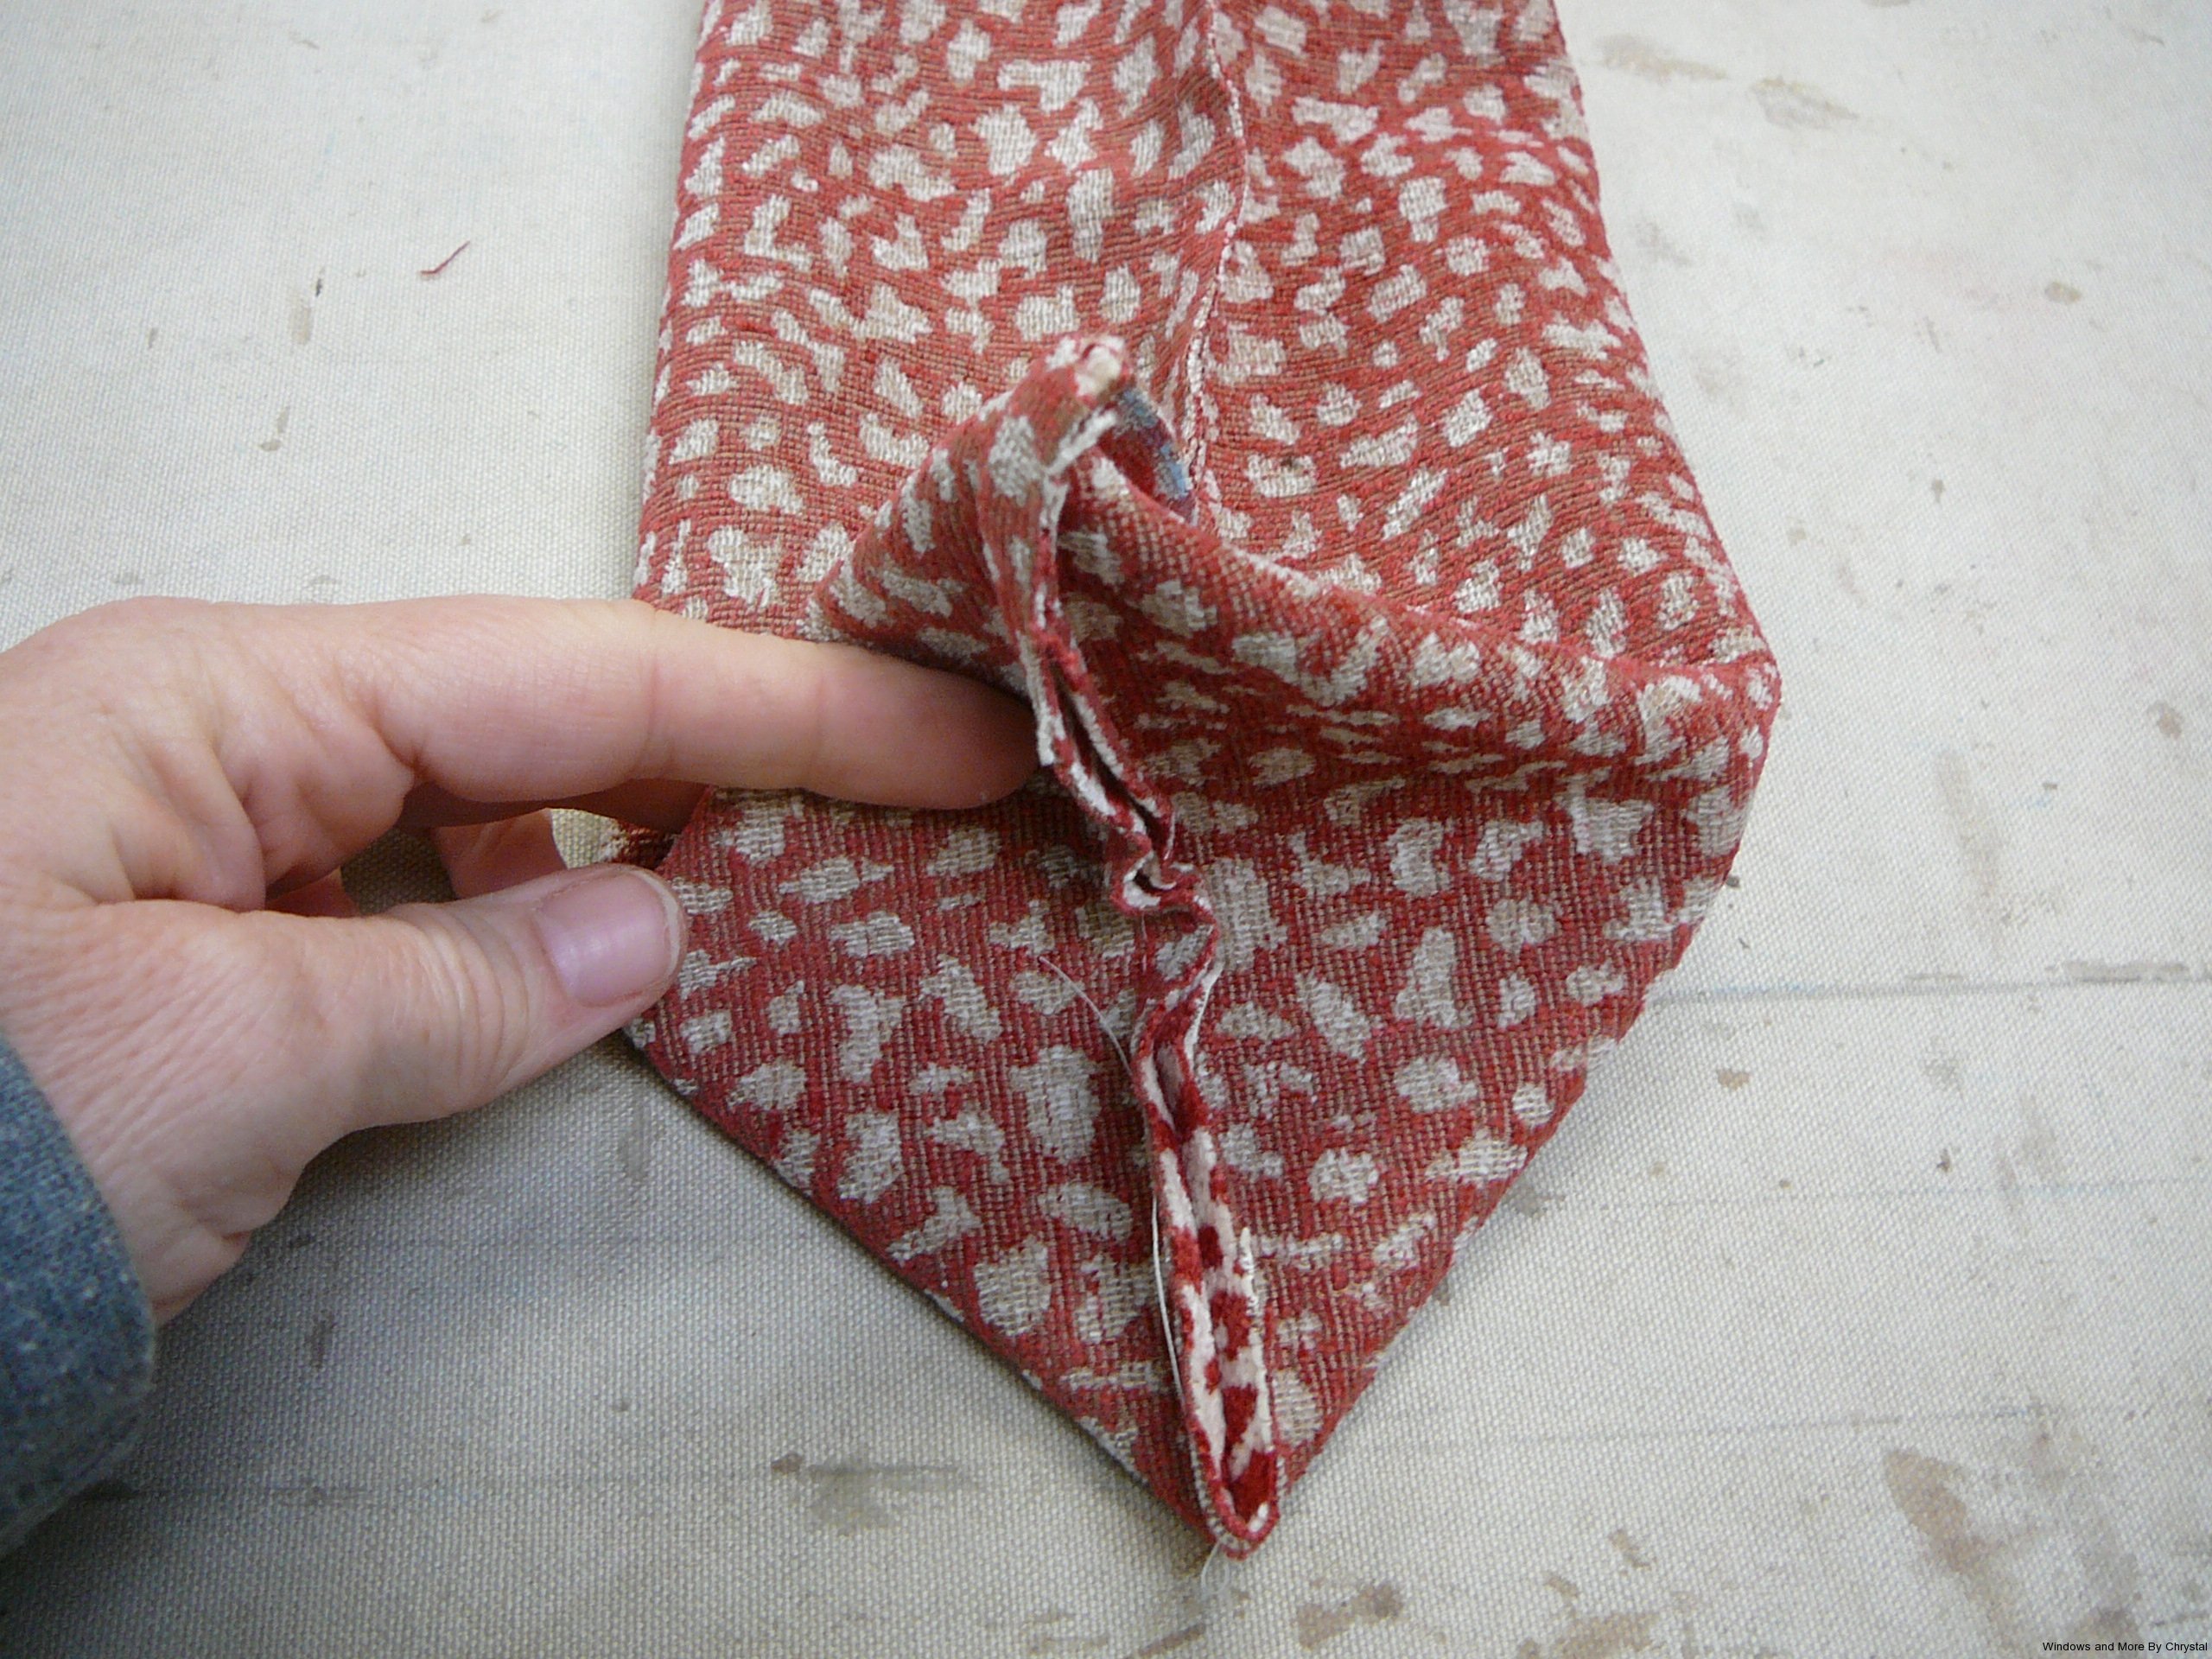 Making the gusset